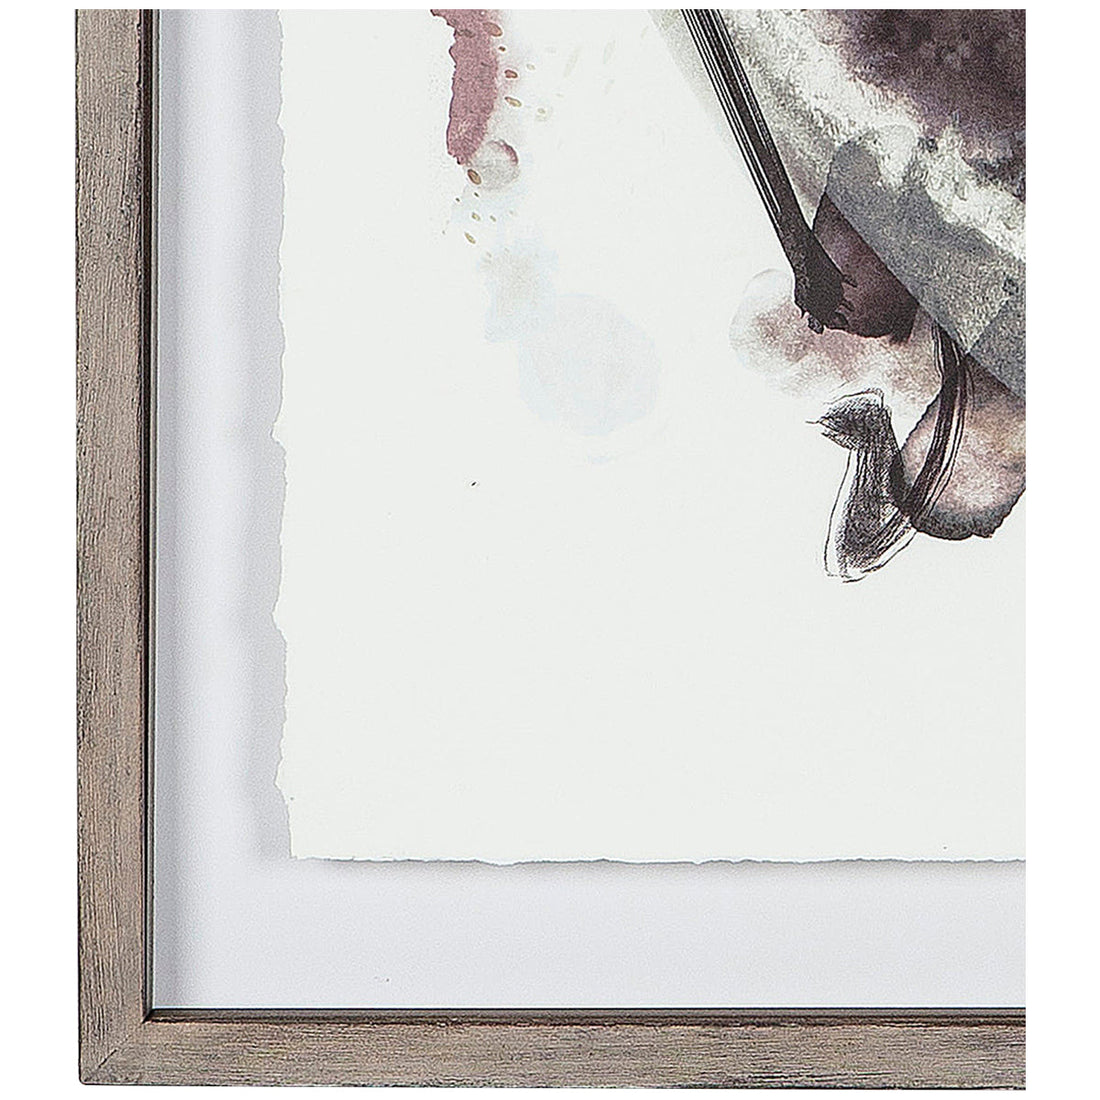 Coup & Co Imaginary Tribe Mask with Wood Frame